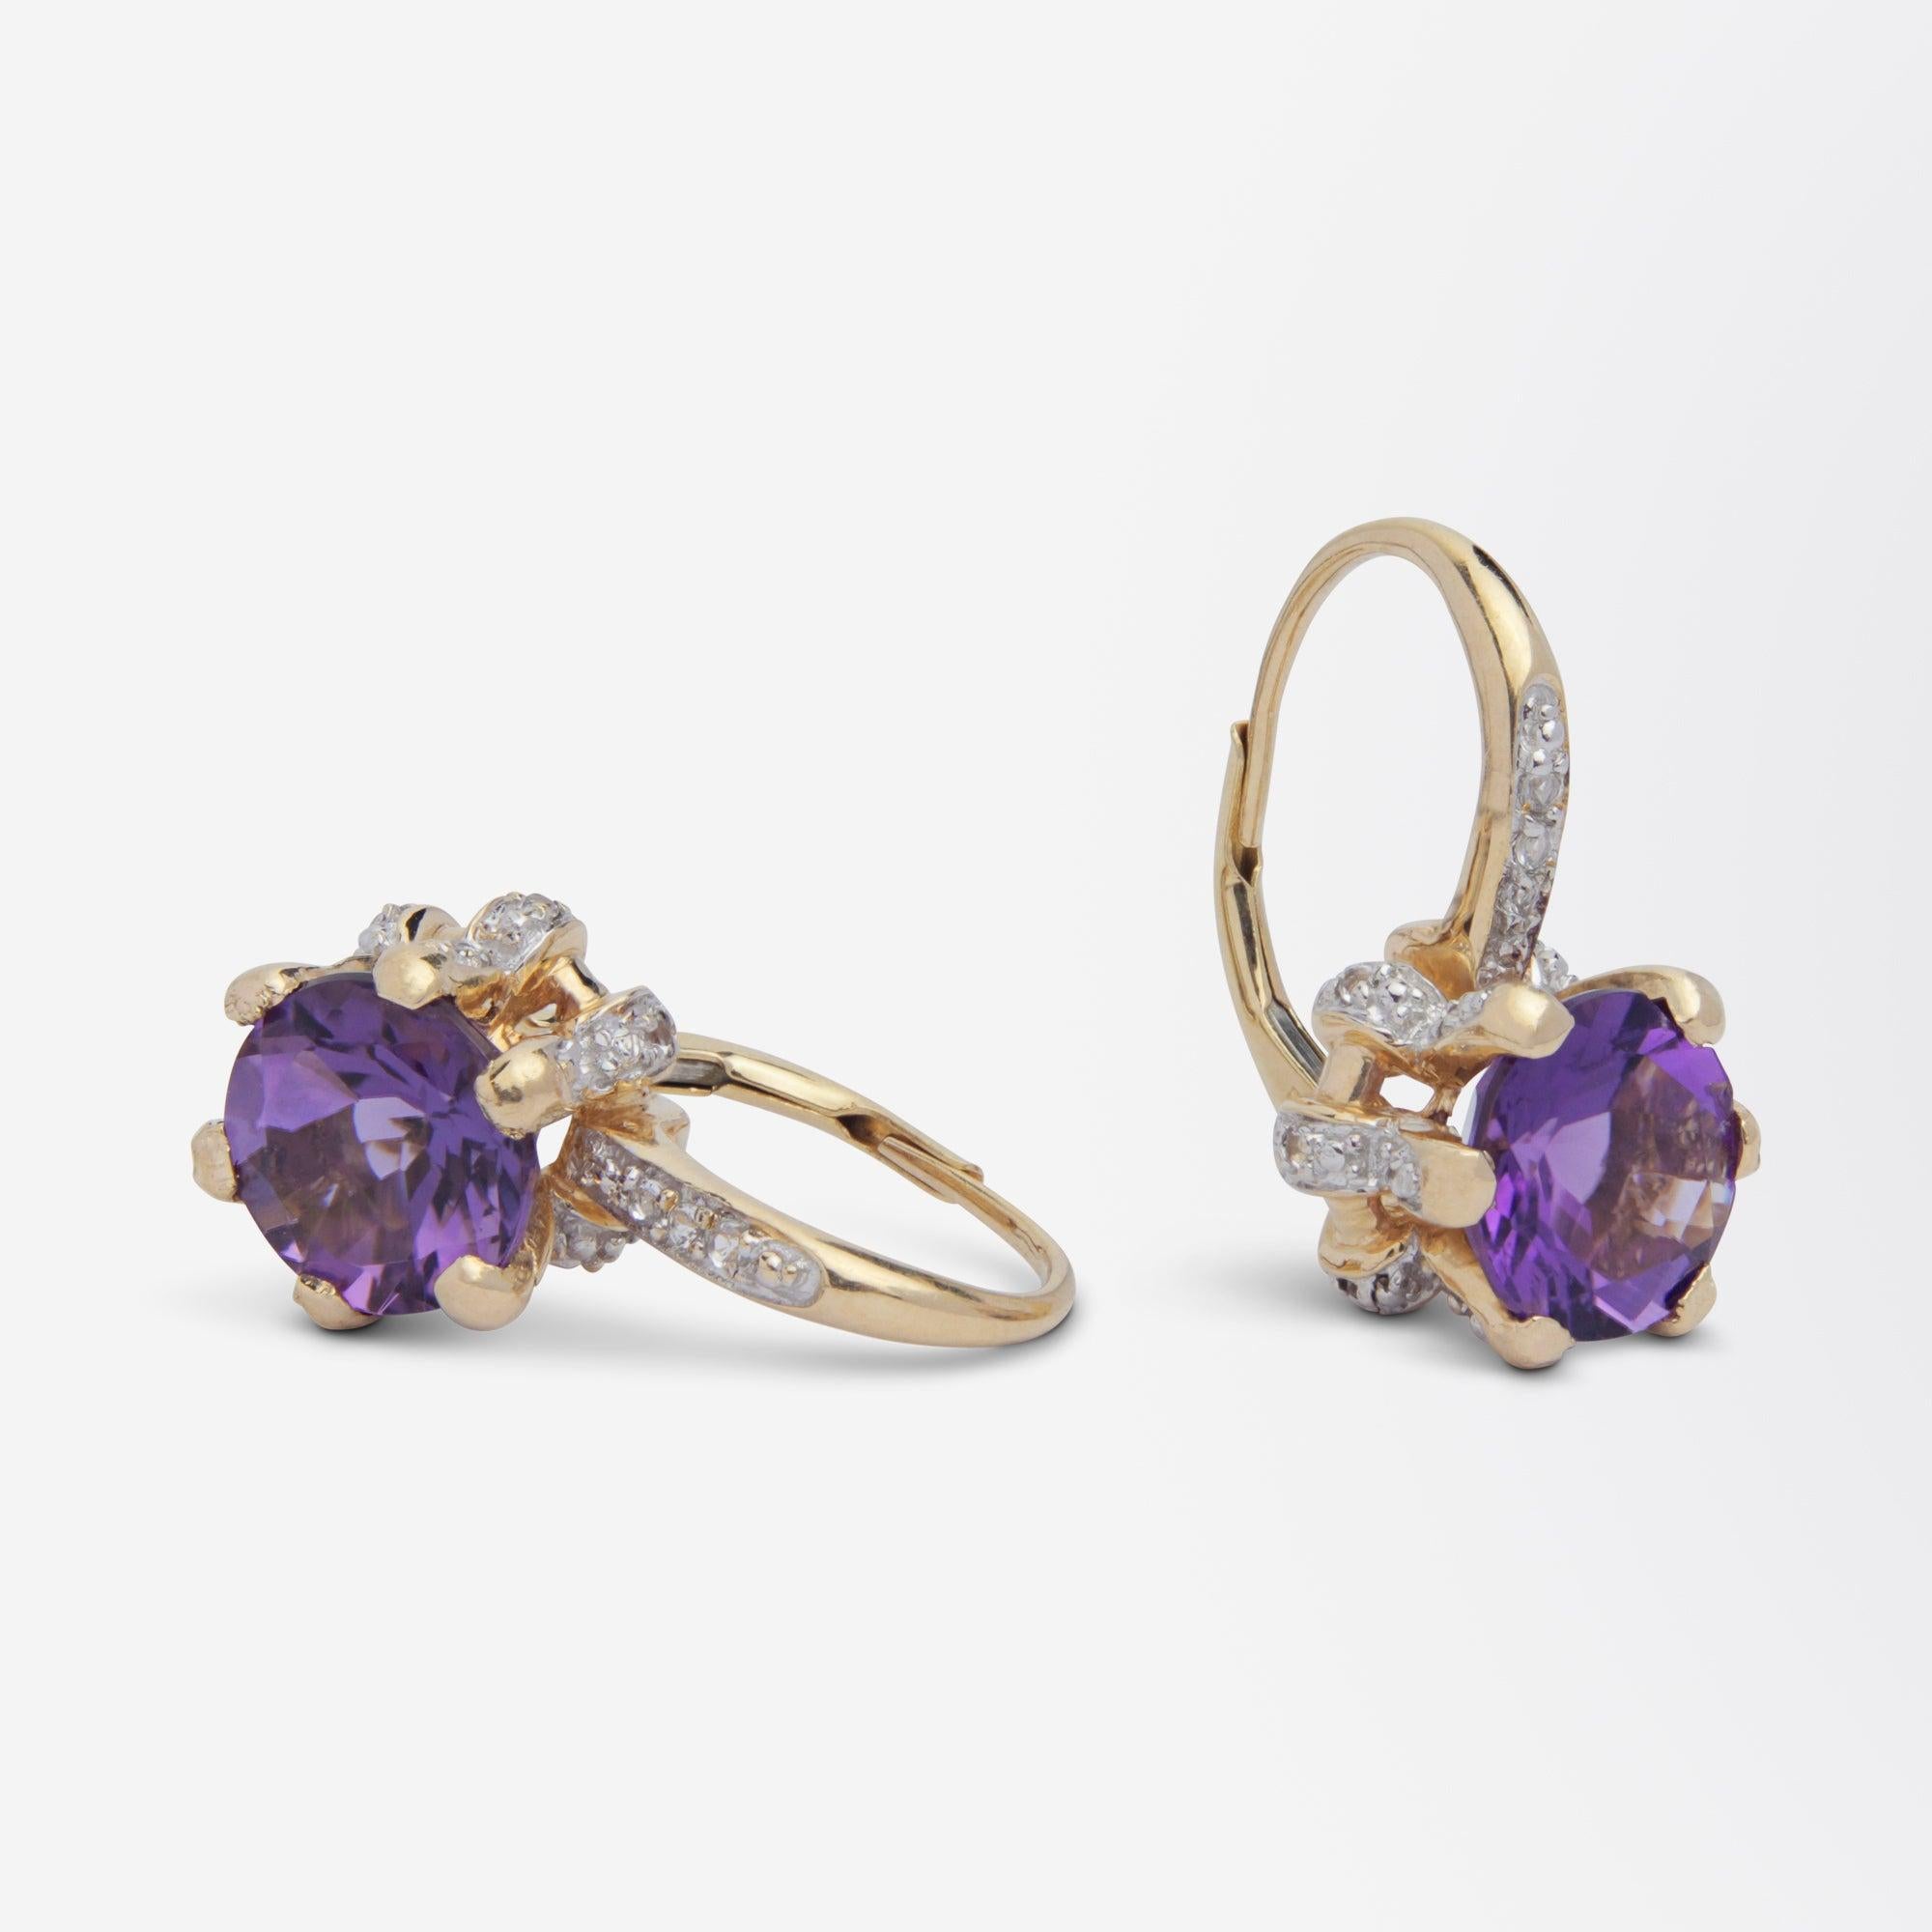 A fun pair of drop earrings featuring a central cut amethyst set with cubic zirconias. The crown shaped claw setting of each earring contains a central brilliant cut topaz. The claws of each setting are claw set with brilliant cut cubic zirconias as